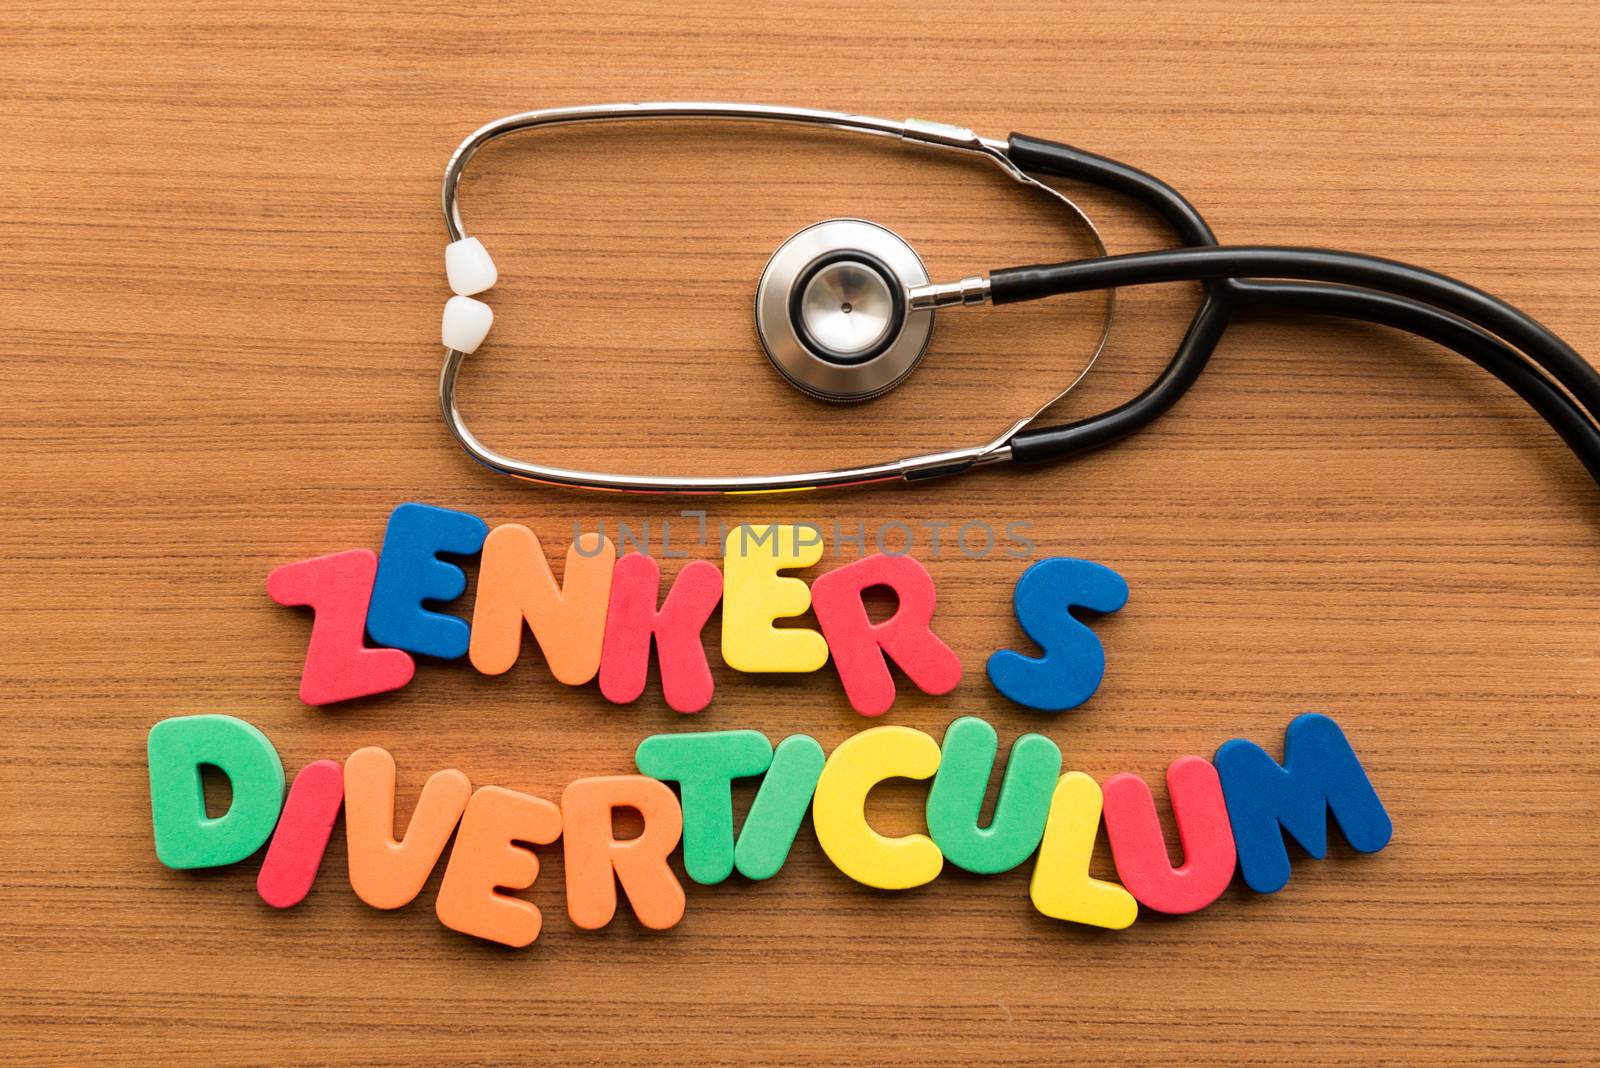 zenker's diverticulum colorful word with stethoscope on wooden background